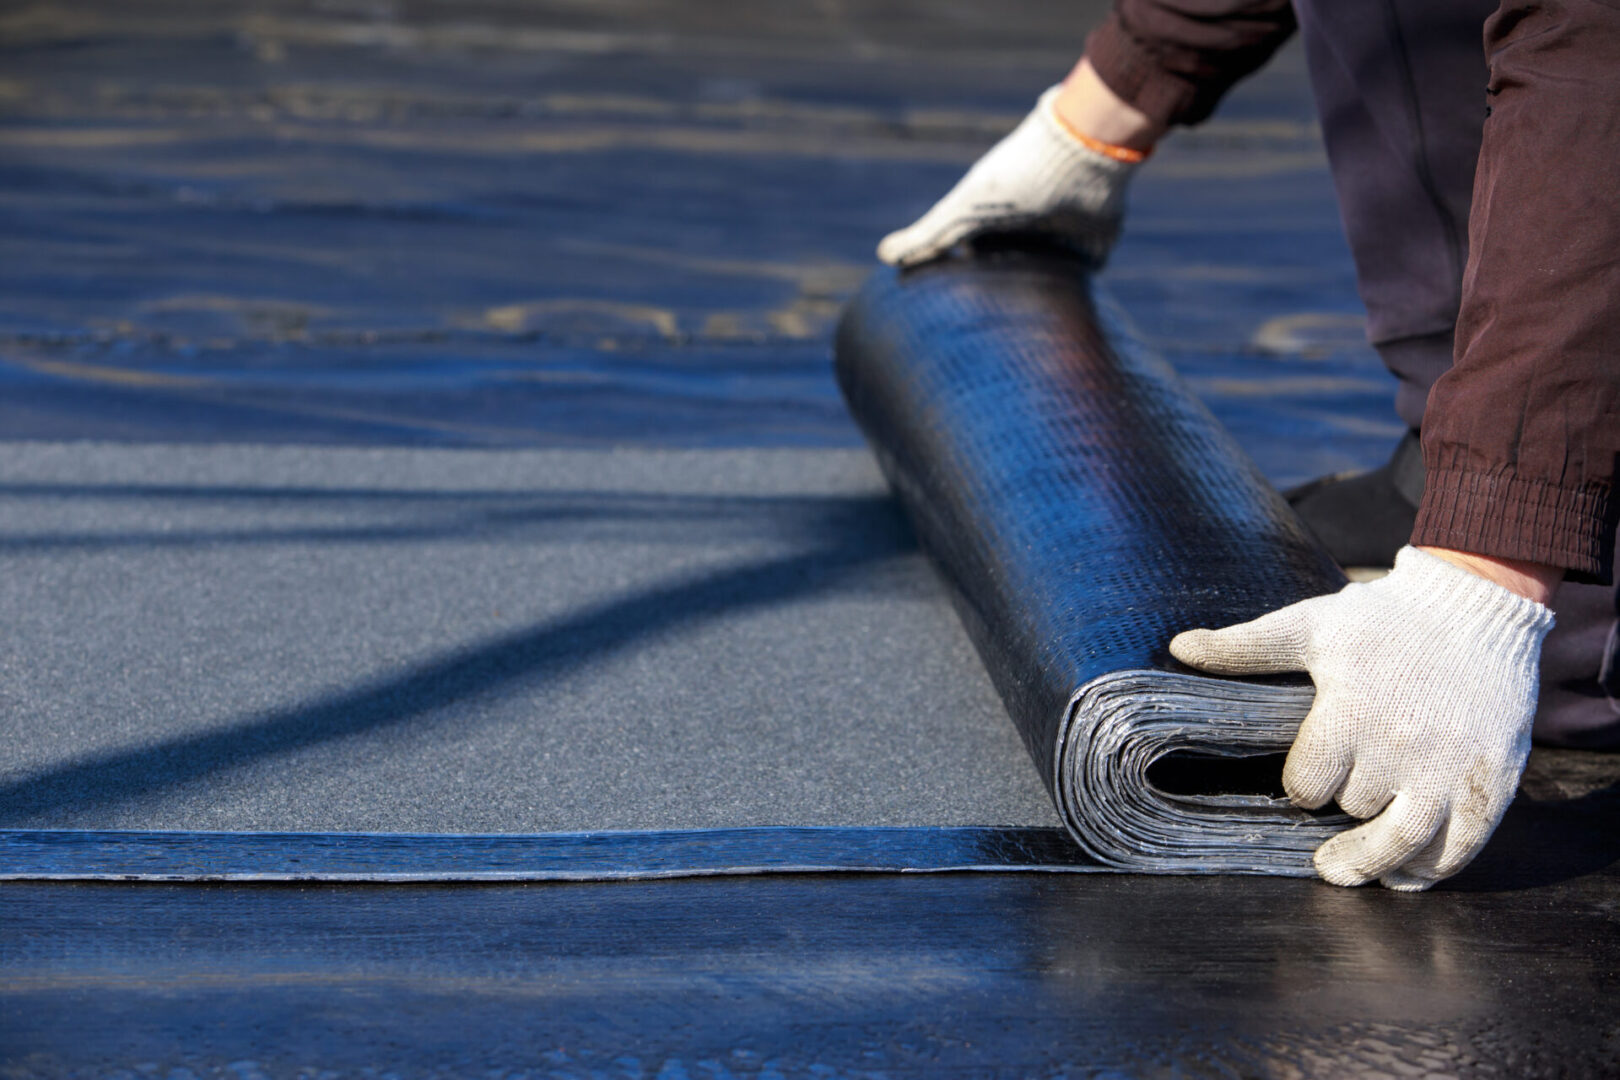 Worker unrolling roofing material